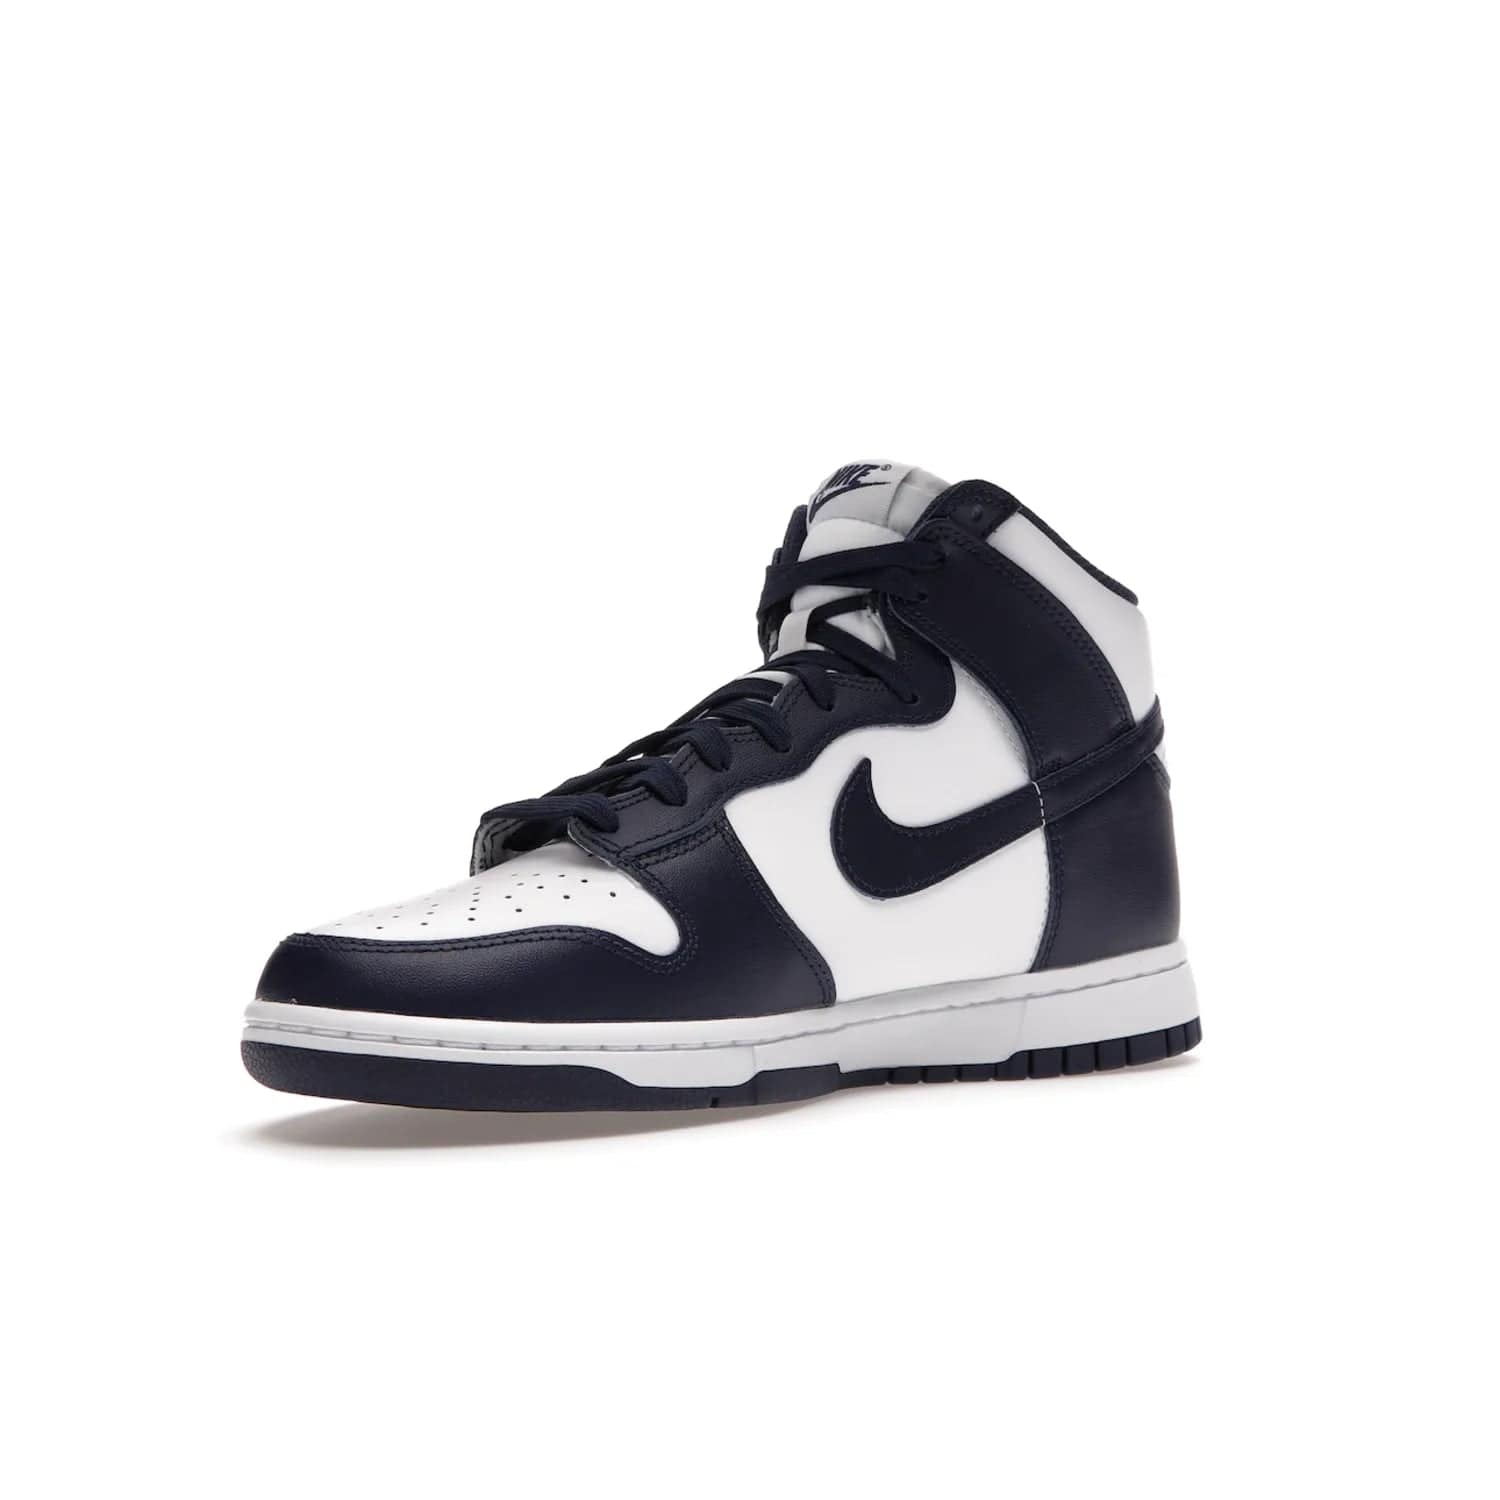 Nike Dunk High Championship Navy - Image 15 - Only at www.BallersClubKickz.com - Classic Nike Dunk High sneaker delivers an unforgettable style with white leather upper, Championship Navy overlays, and matching woven tongue label and sole. Make a statement with the Championship Navy today.